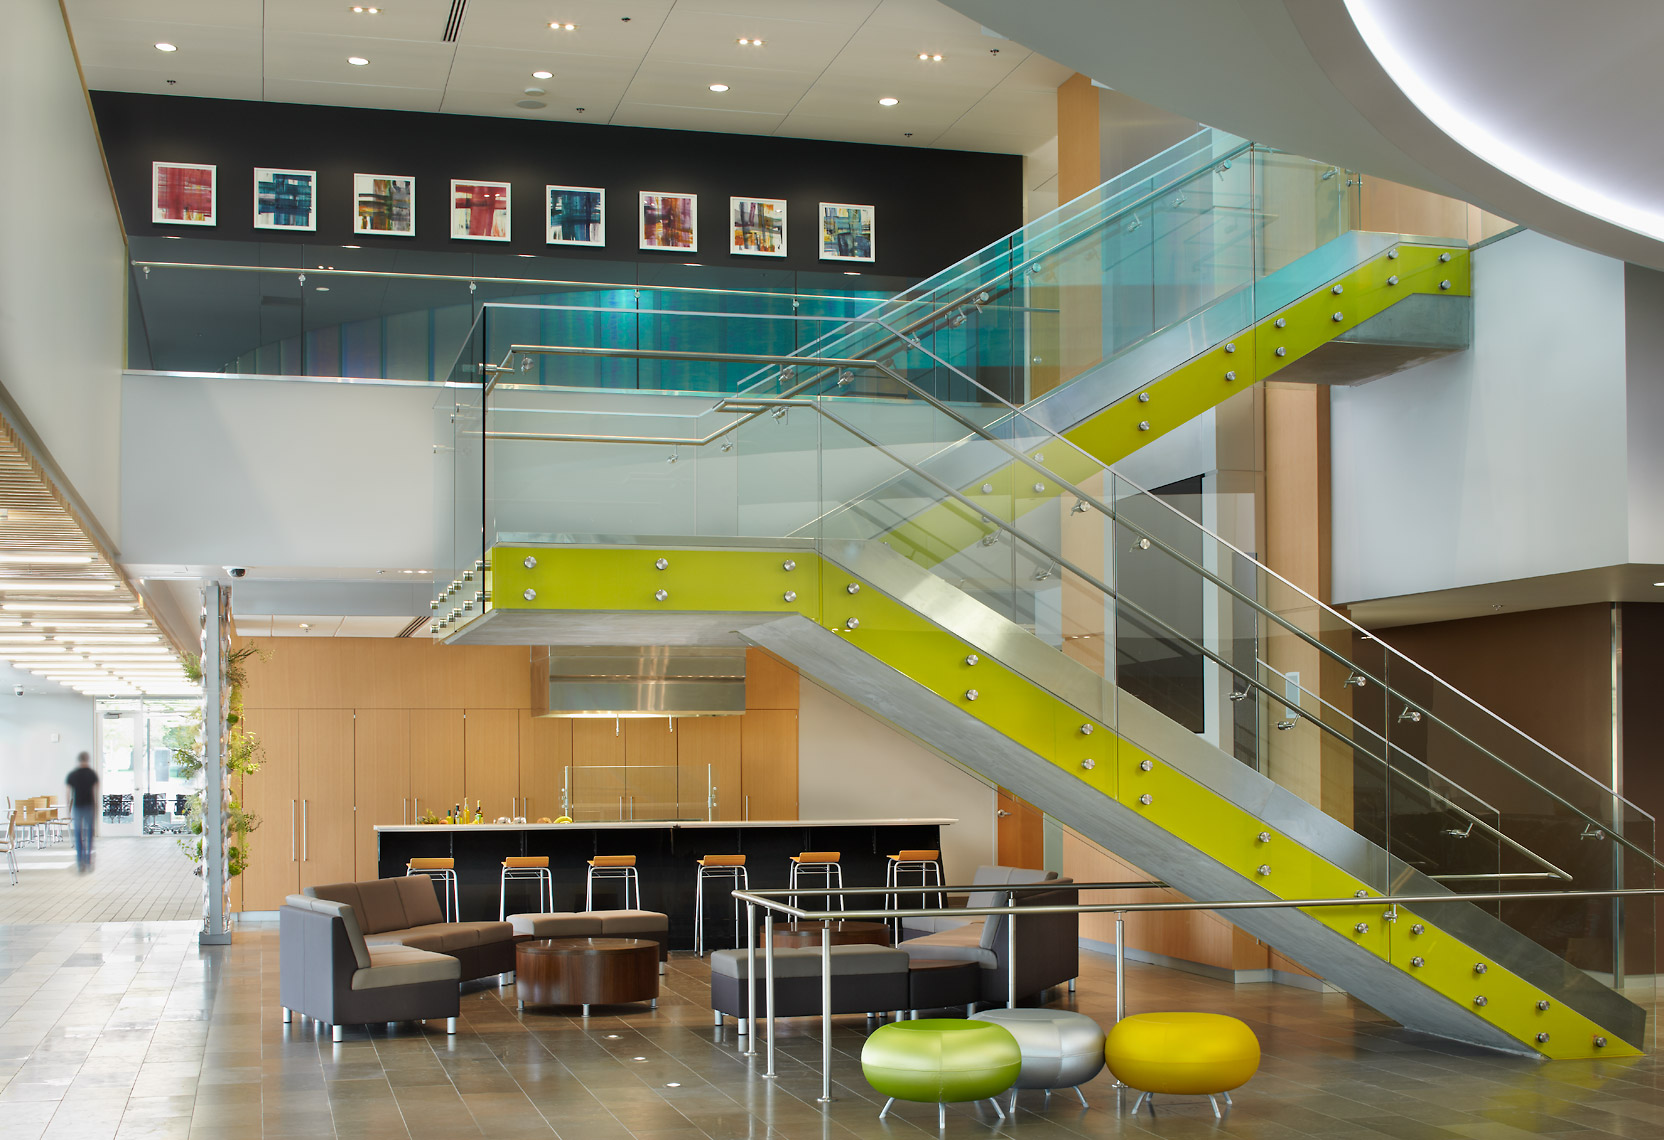 David Patterson Photography/Photography of Architecture+ Interiors, Aurora, Colorado, K-12, Higher Education